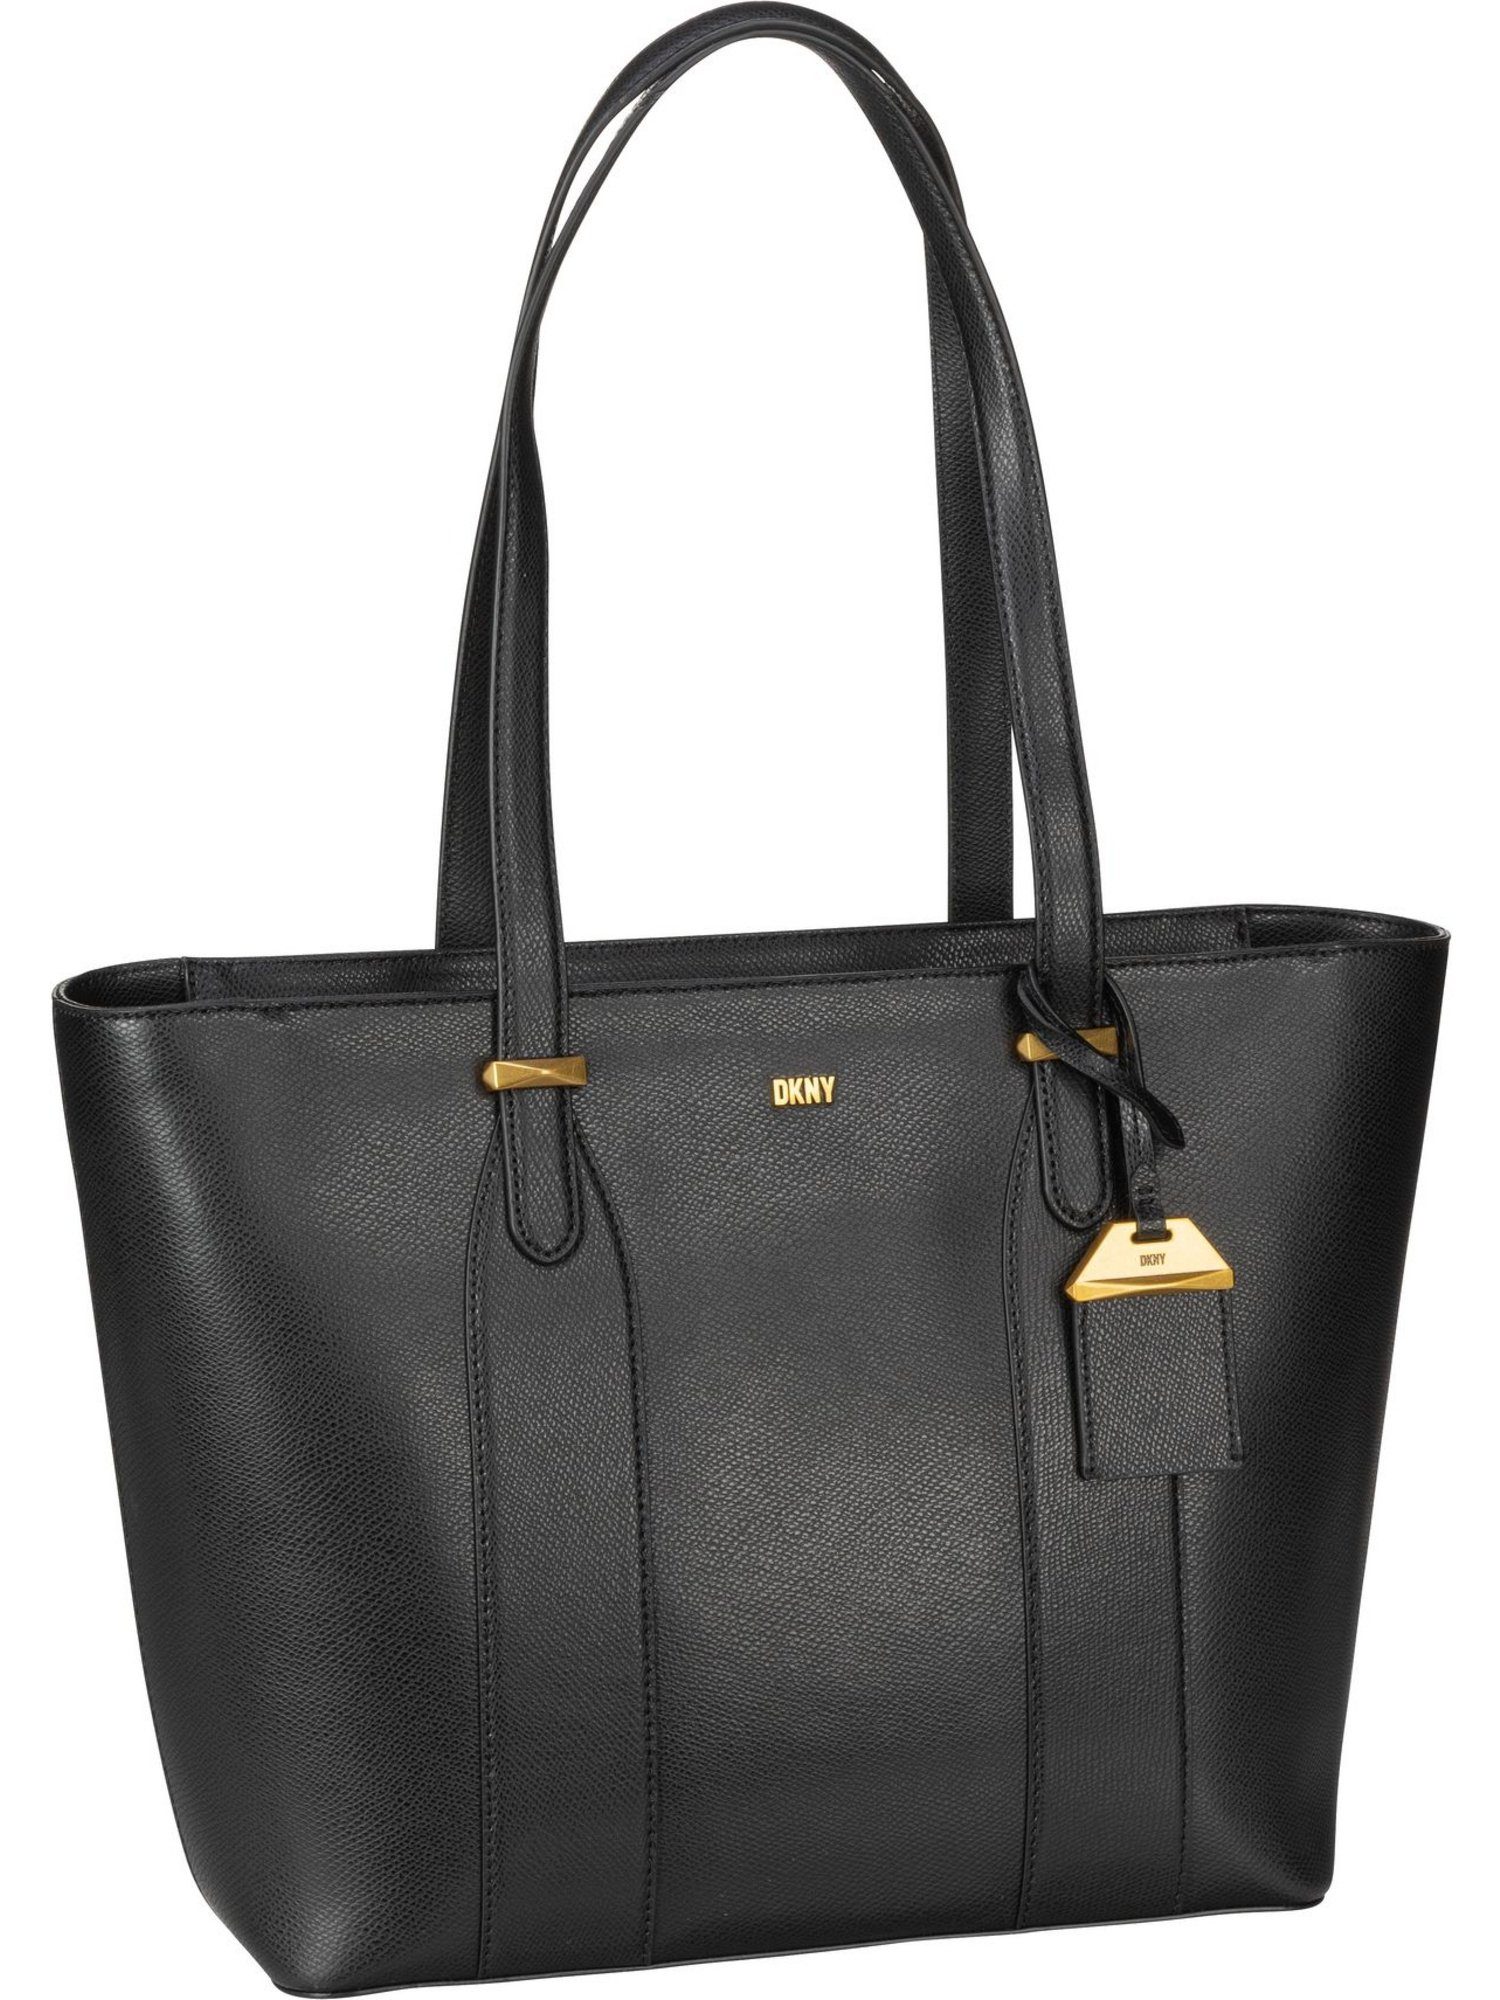 DKNY Shopper Tote Leather Dundee Marykate